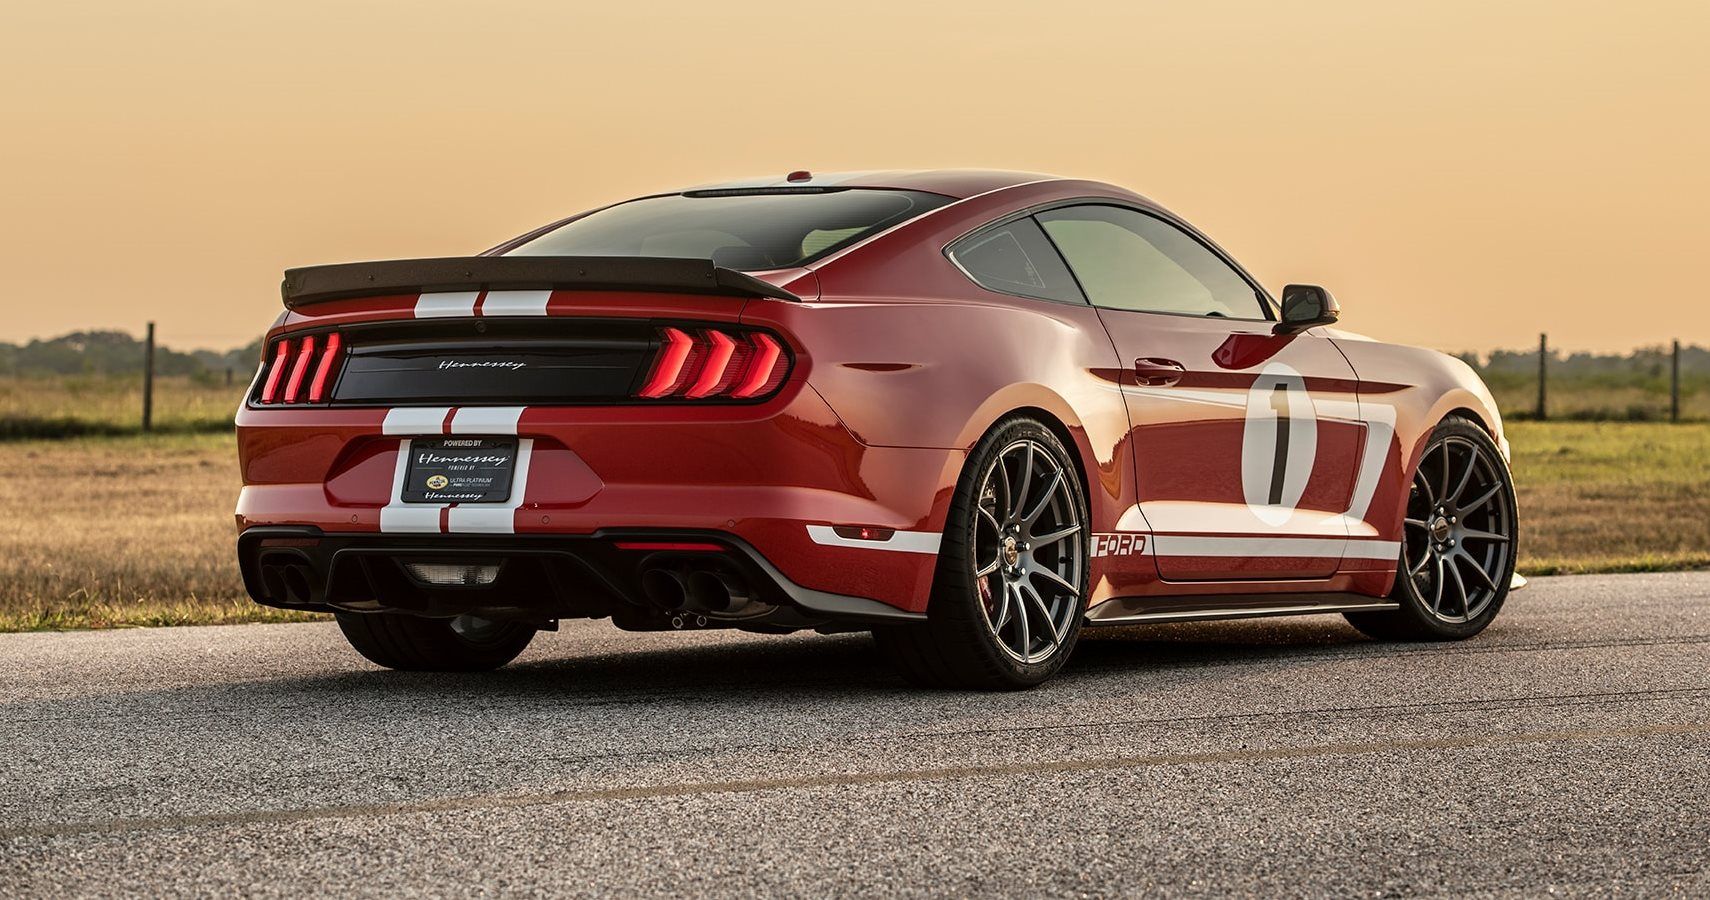 Hennessey’s Heritage Edition Mustang Offers Insane Power